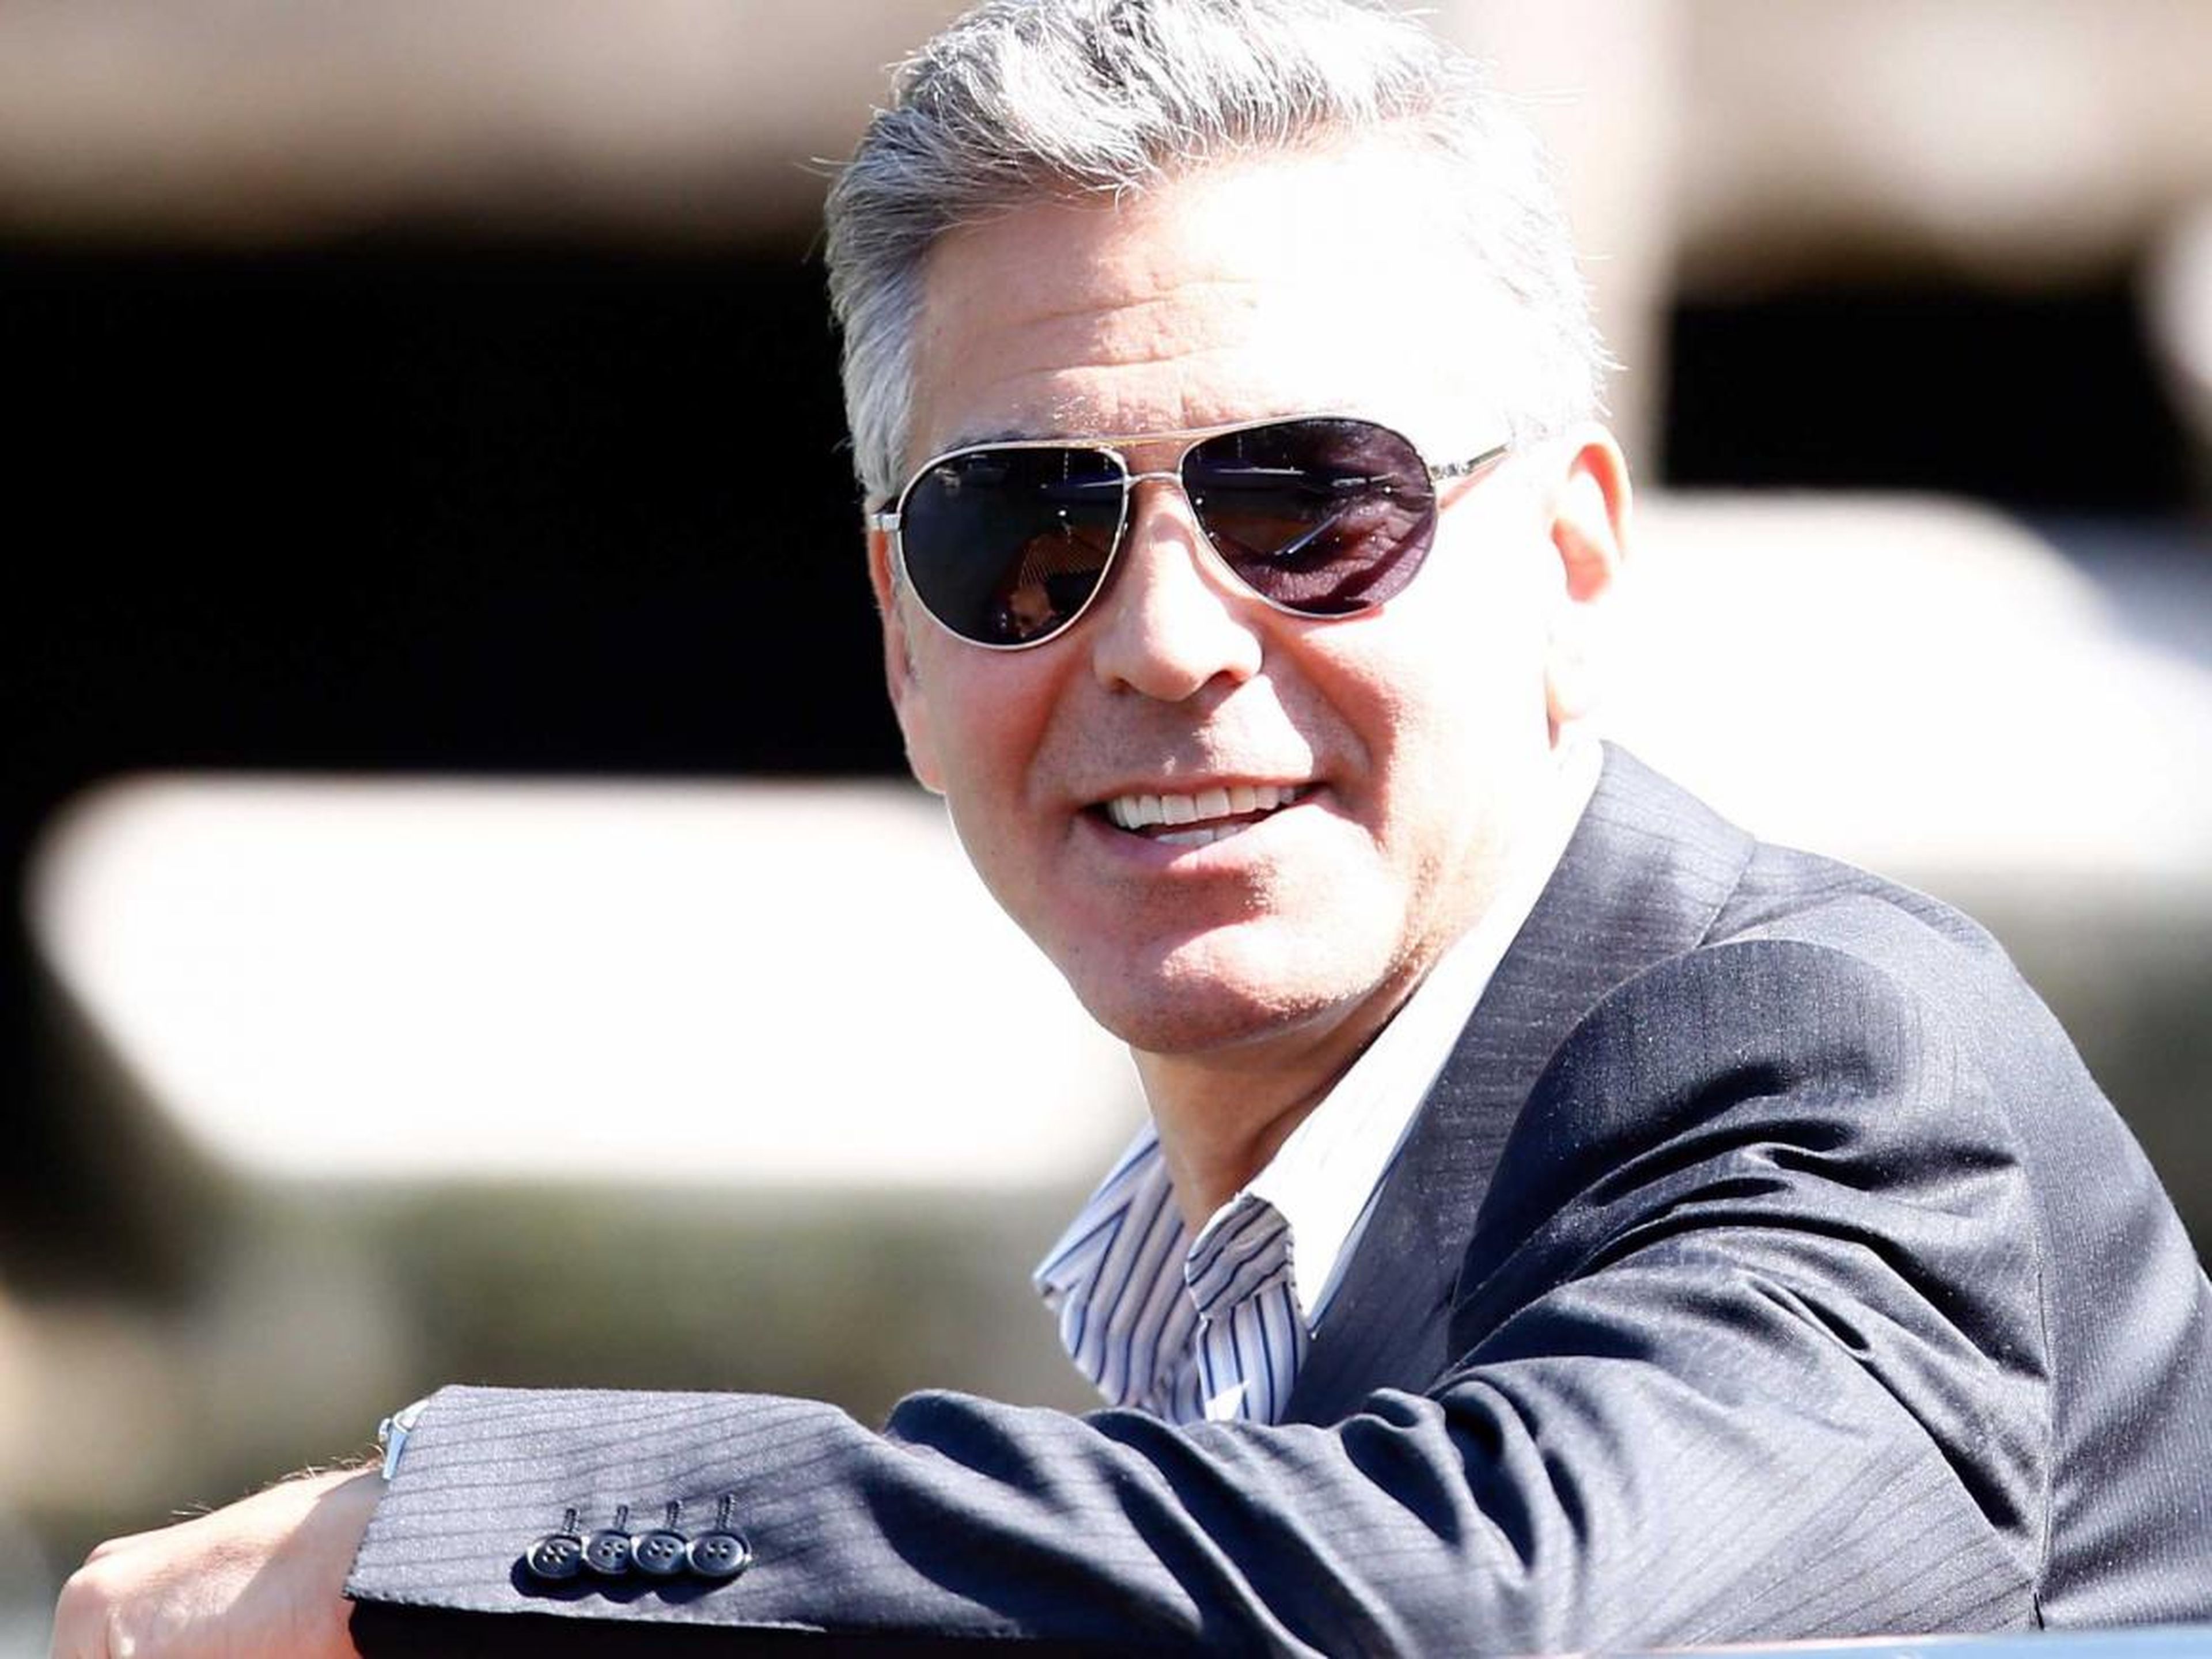 George Clooney has vocally opposed Facebook and Twitter. "I'd rather have a rectal examination on live TV by a fellow with cold hands than have a Facebook page," he once said.